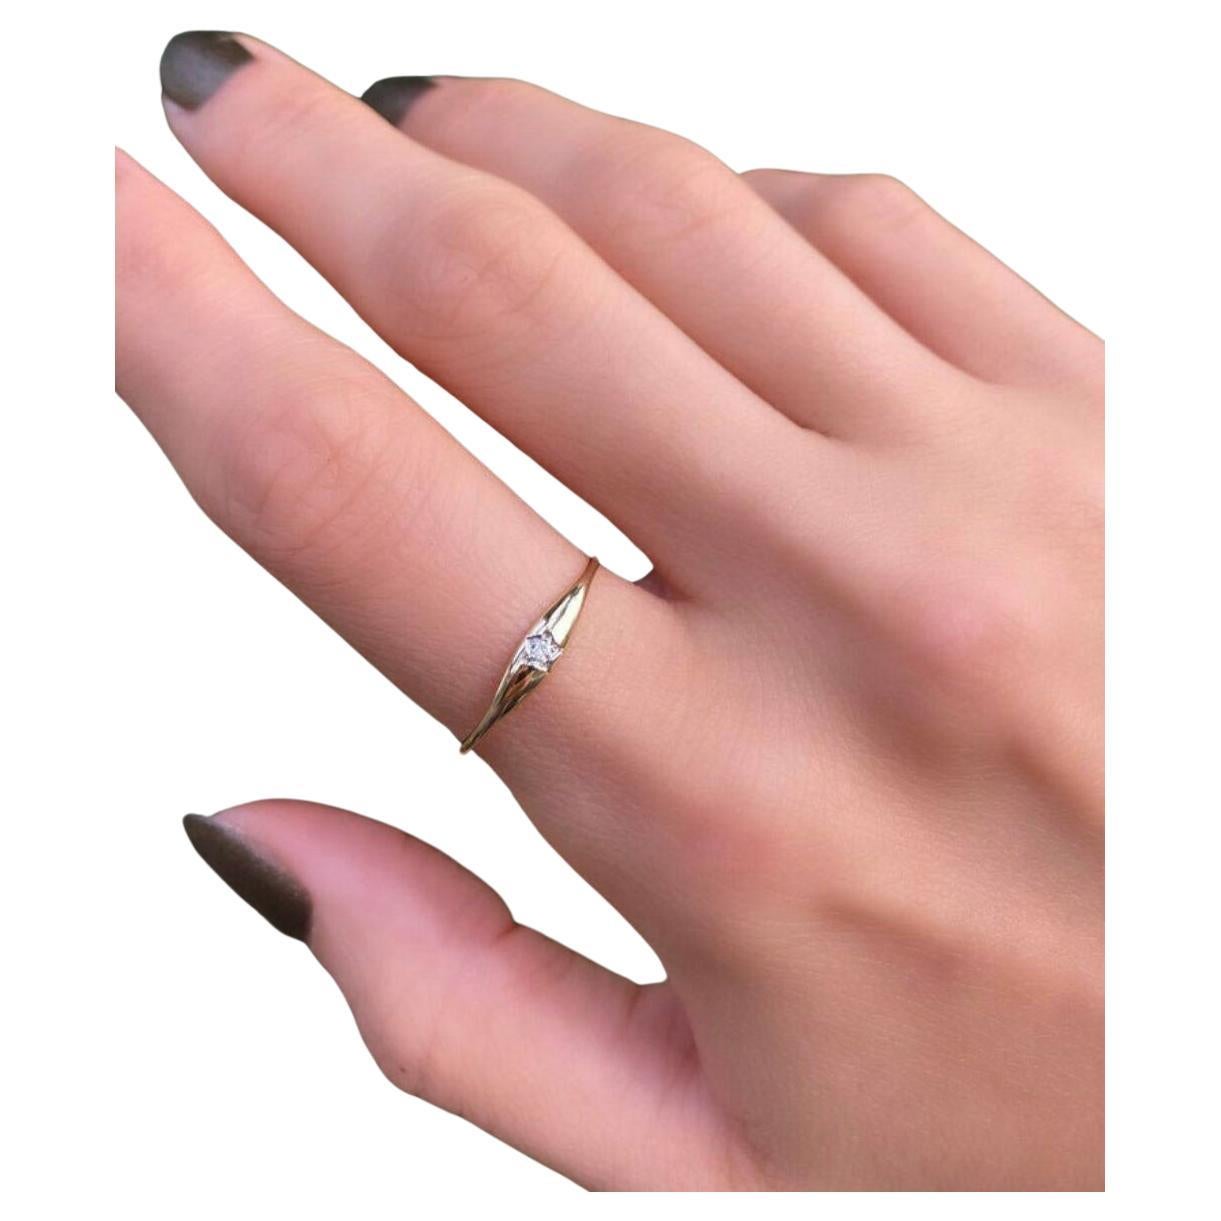 Diamond Star Ring 14k Gold Stackable Ring Dainty Mothers Day Ring Gift For Her.